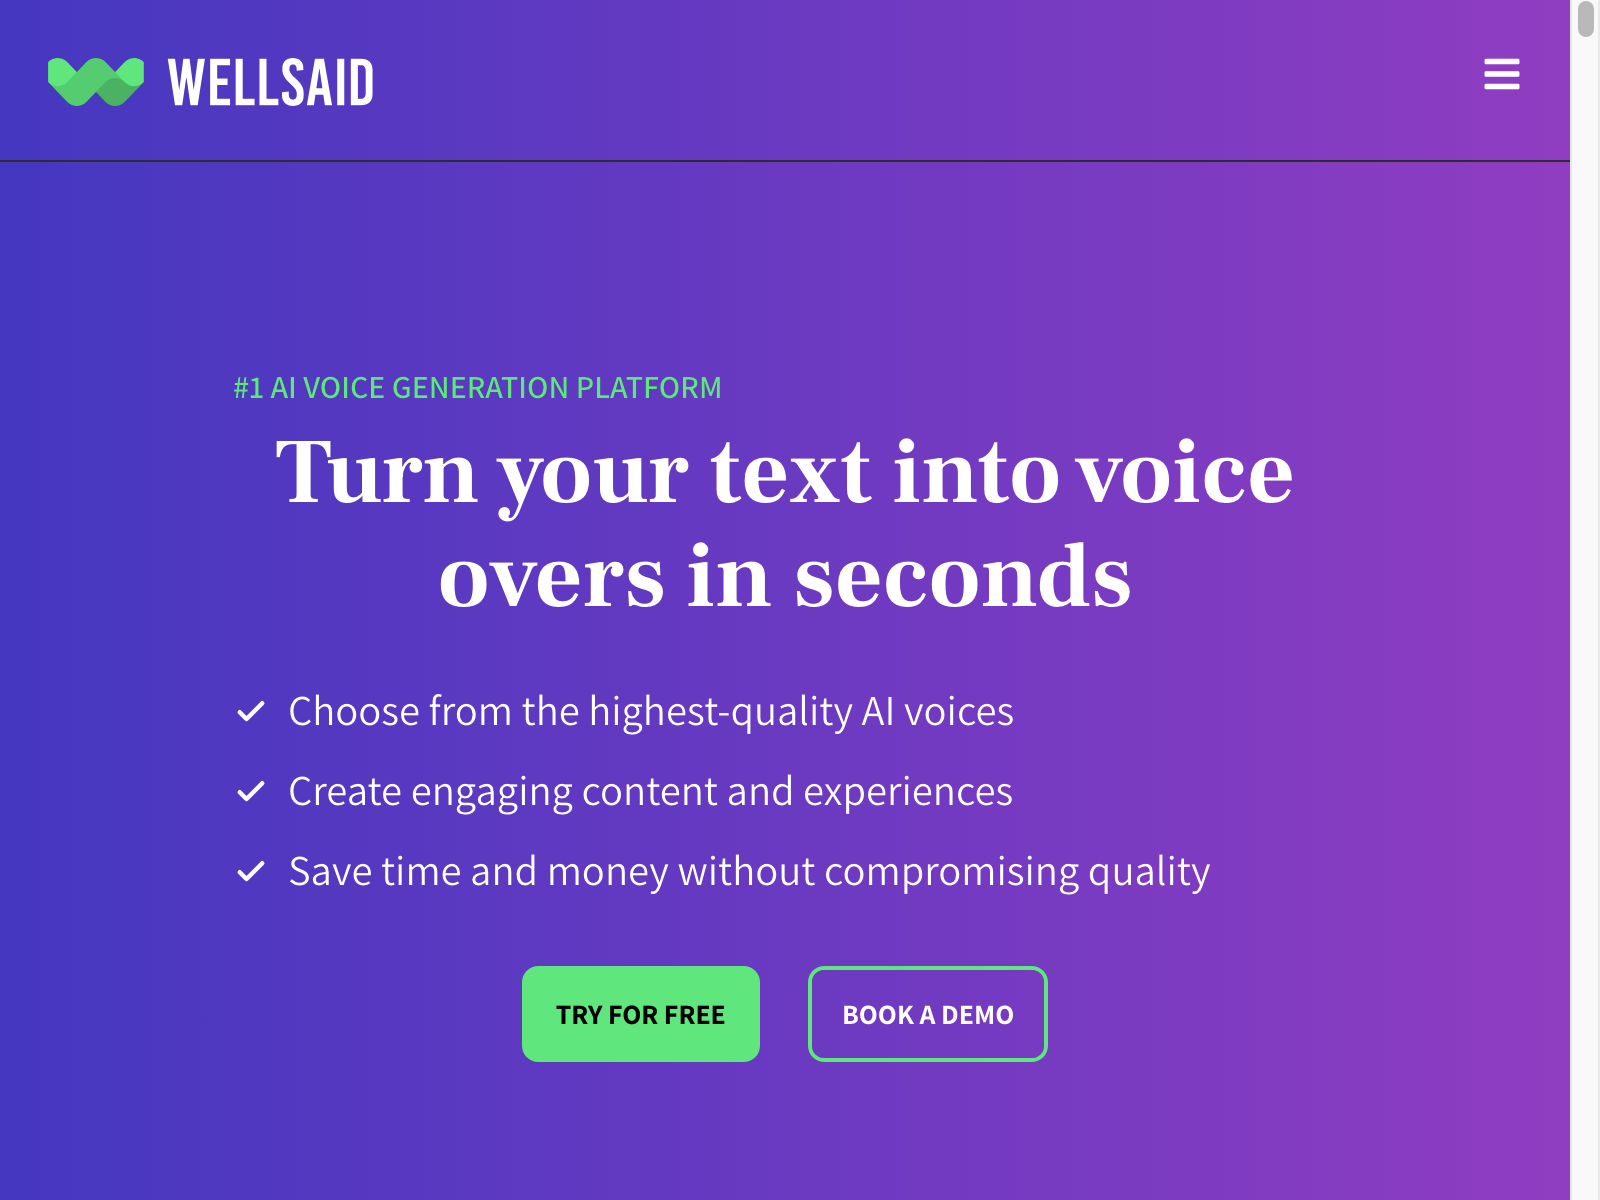 wellsaid Review: Pros, Cons, Alternatives